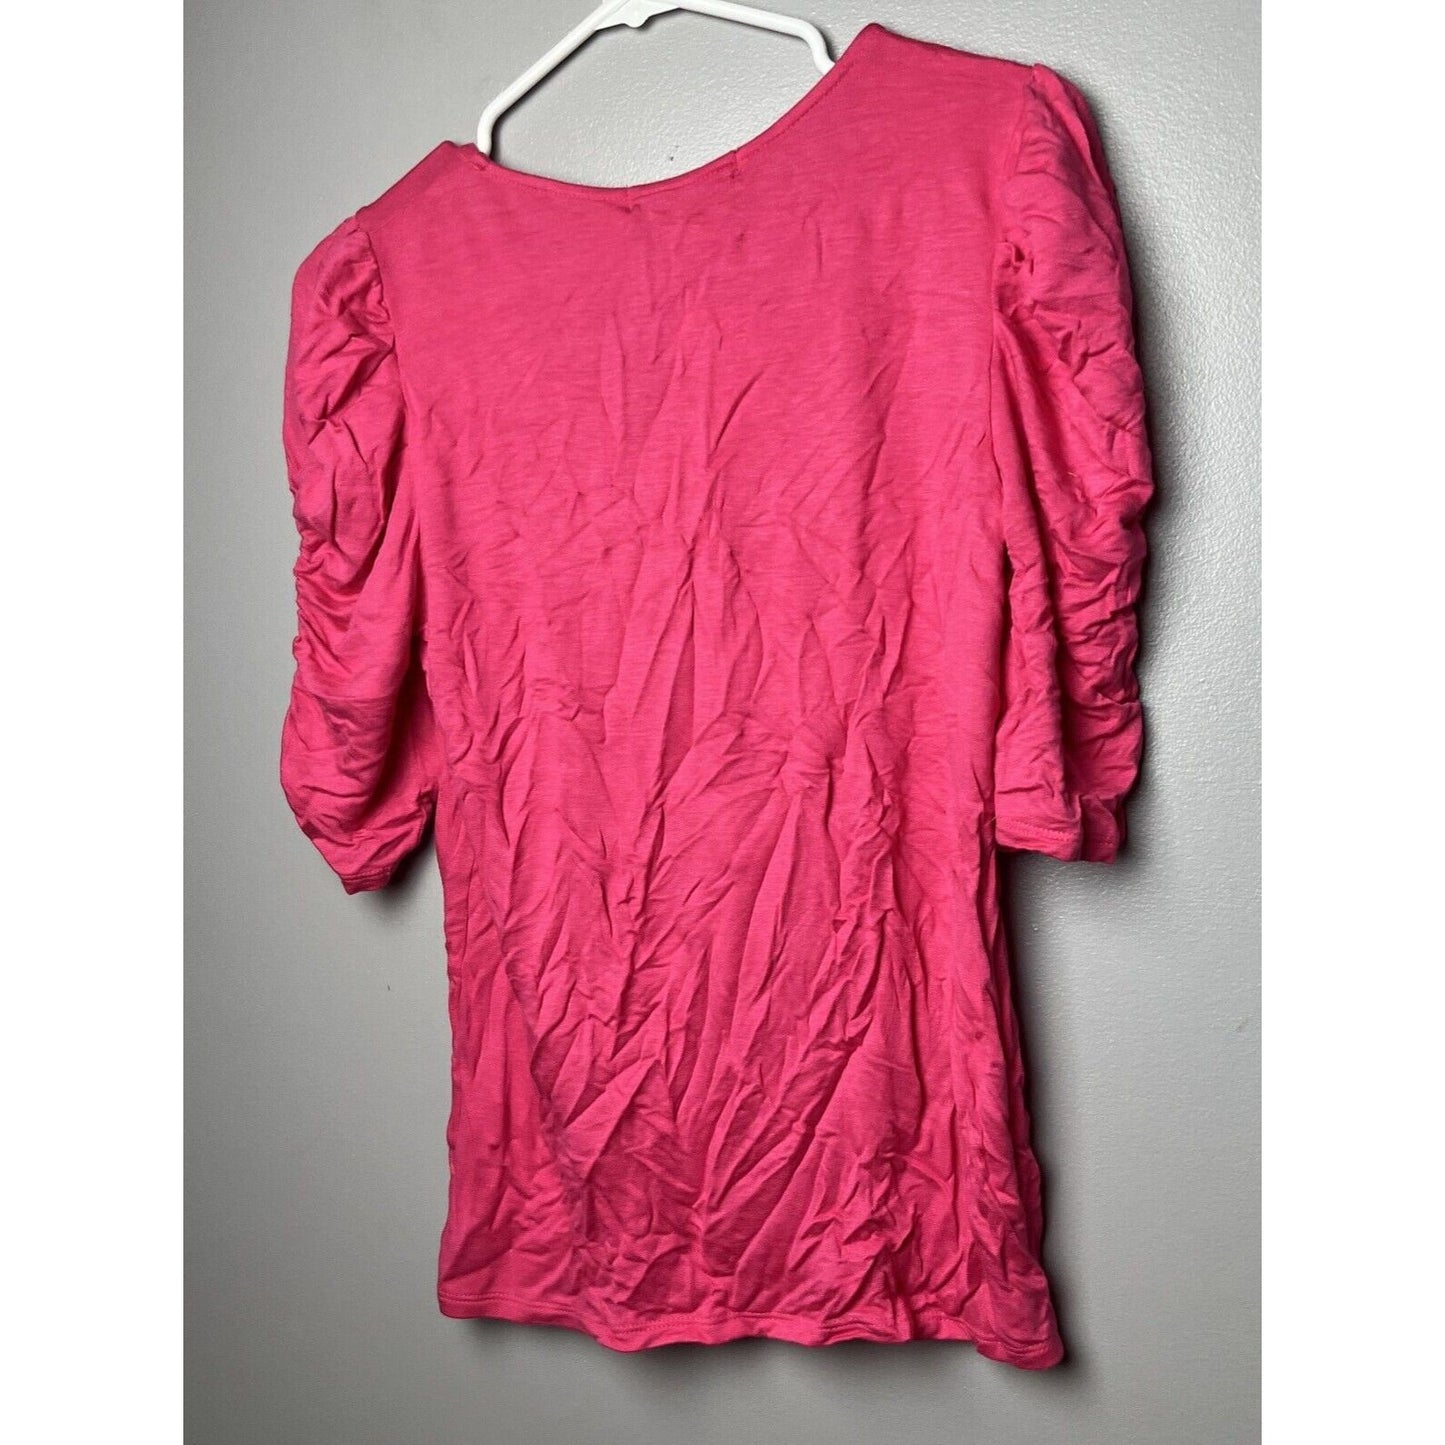 Gibson Look V-Neck Ruched Sleeve Top In Bright Coral XXS NWT